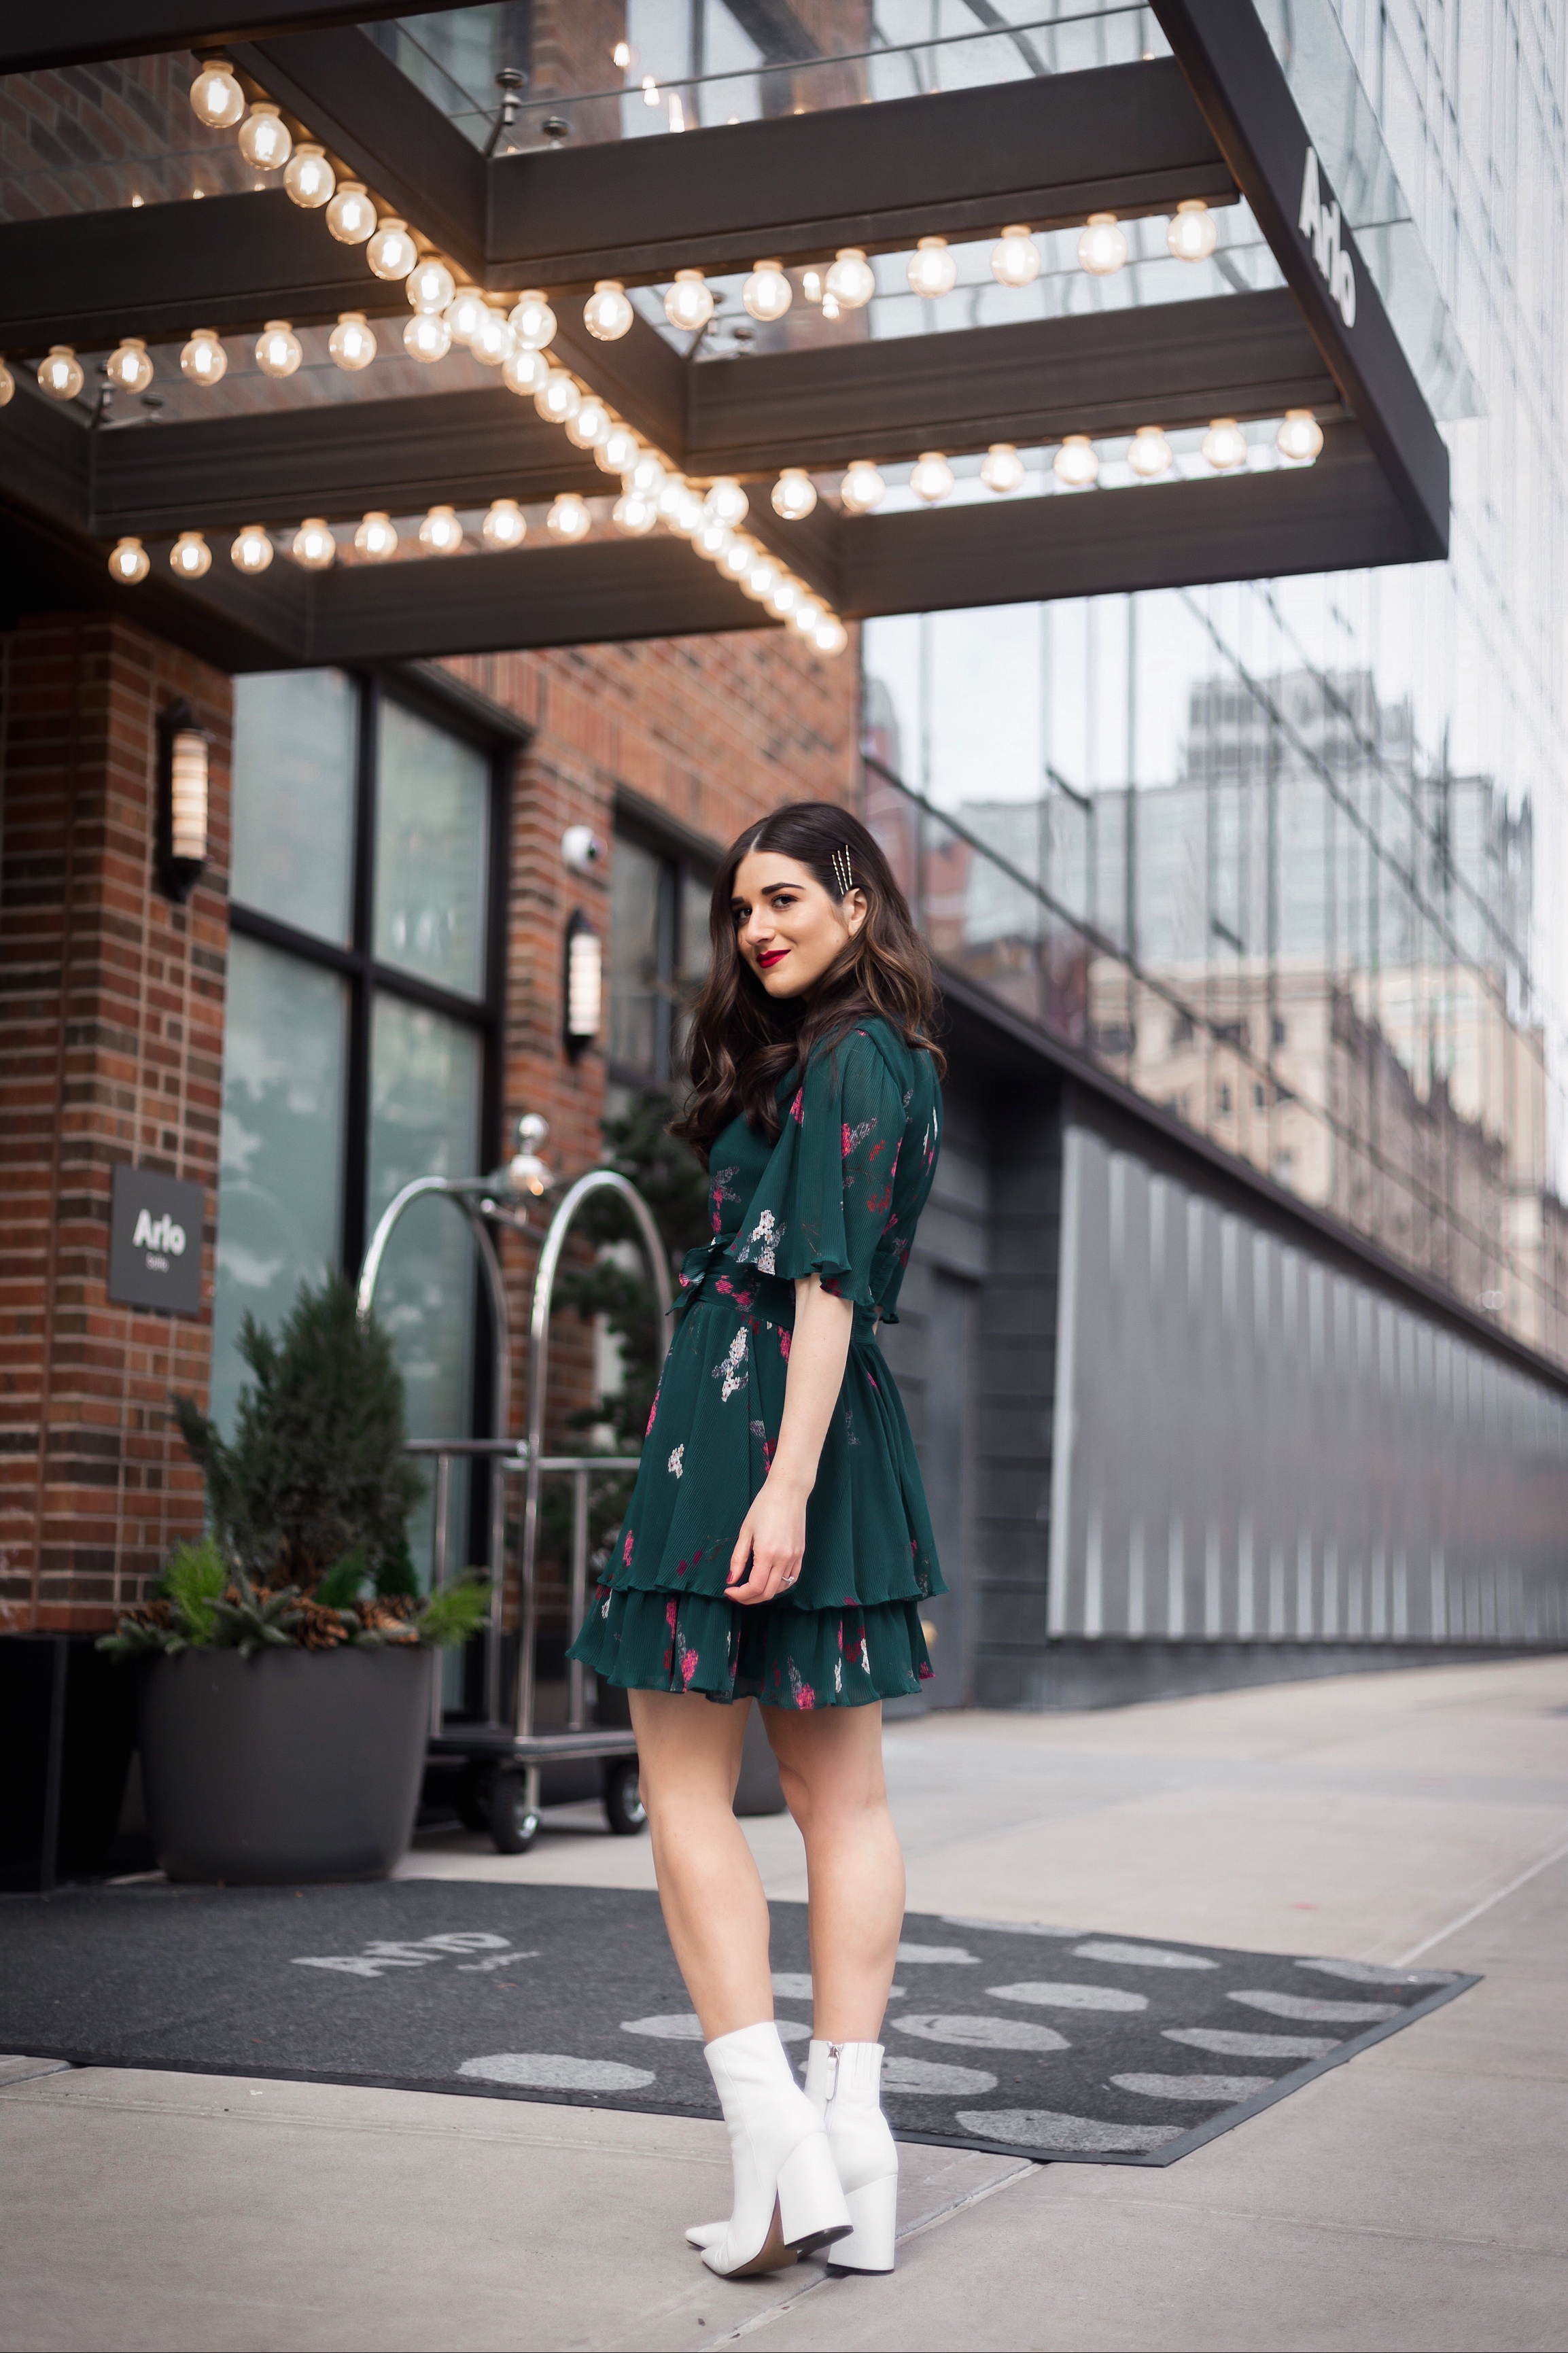 10 NYC  Experiences Everyone Should Have Green Floral Dress White Booties Esther Santer Fashion Blog NYC Street Style Blogger Outfit OOTD Trendy Shopping Girl What How To Wear Bobby Pins Hairstyle Fall Look Butterfly Sleeves Keepsake Label Arlo Soho.JPG